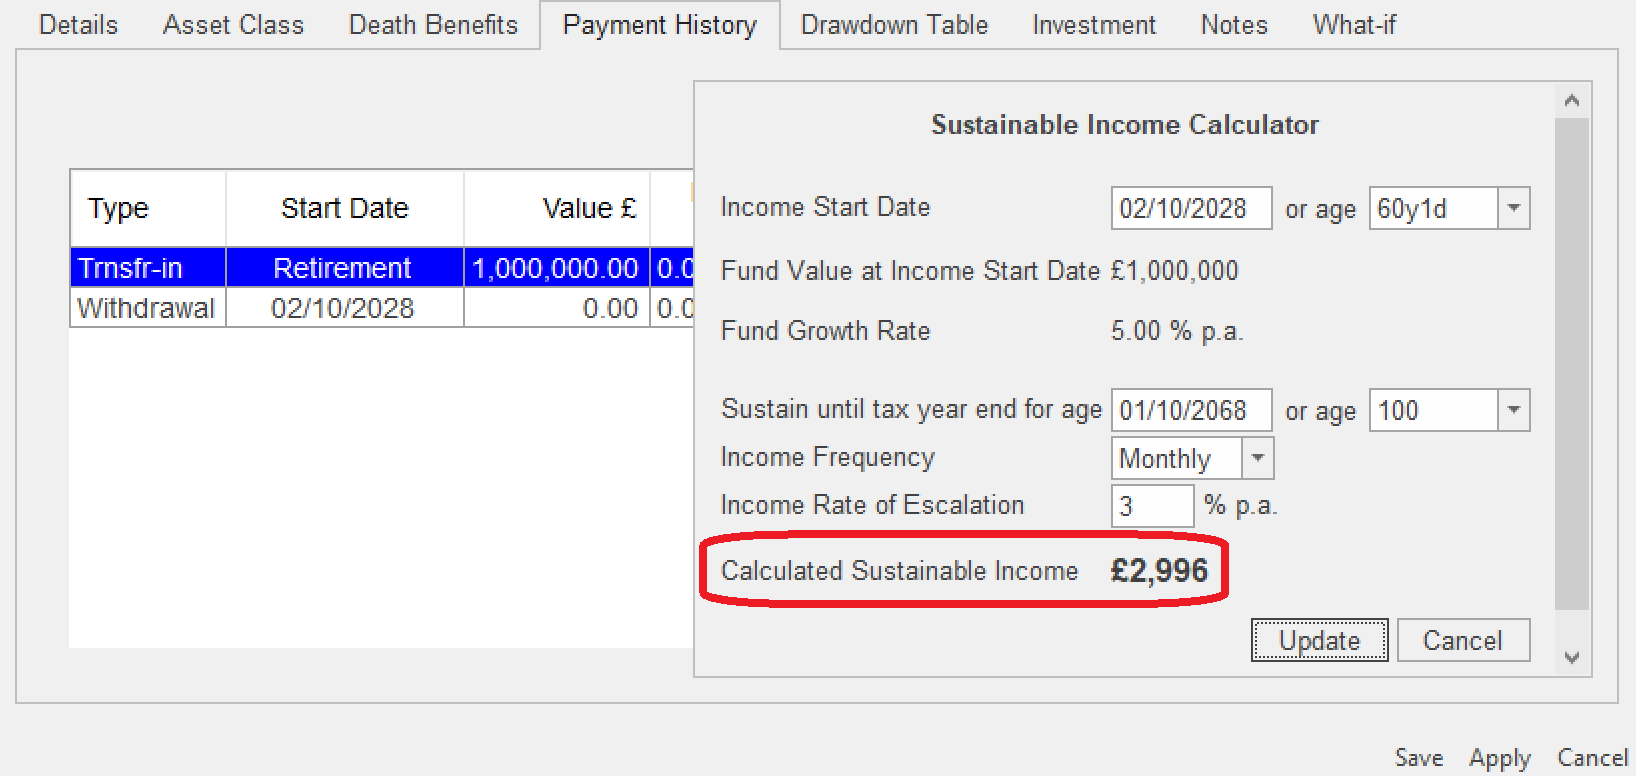 prestwood truth software release notes pension drawdown sustainable income calculator result